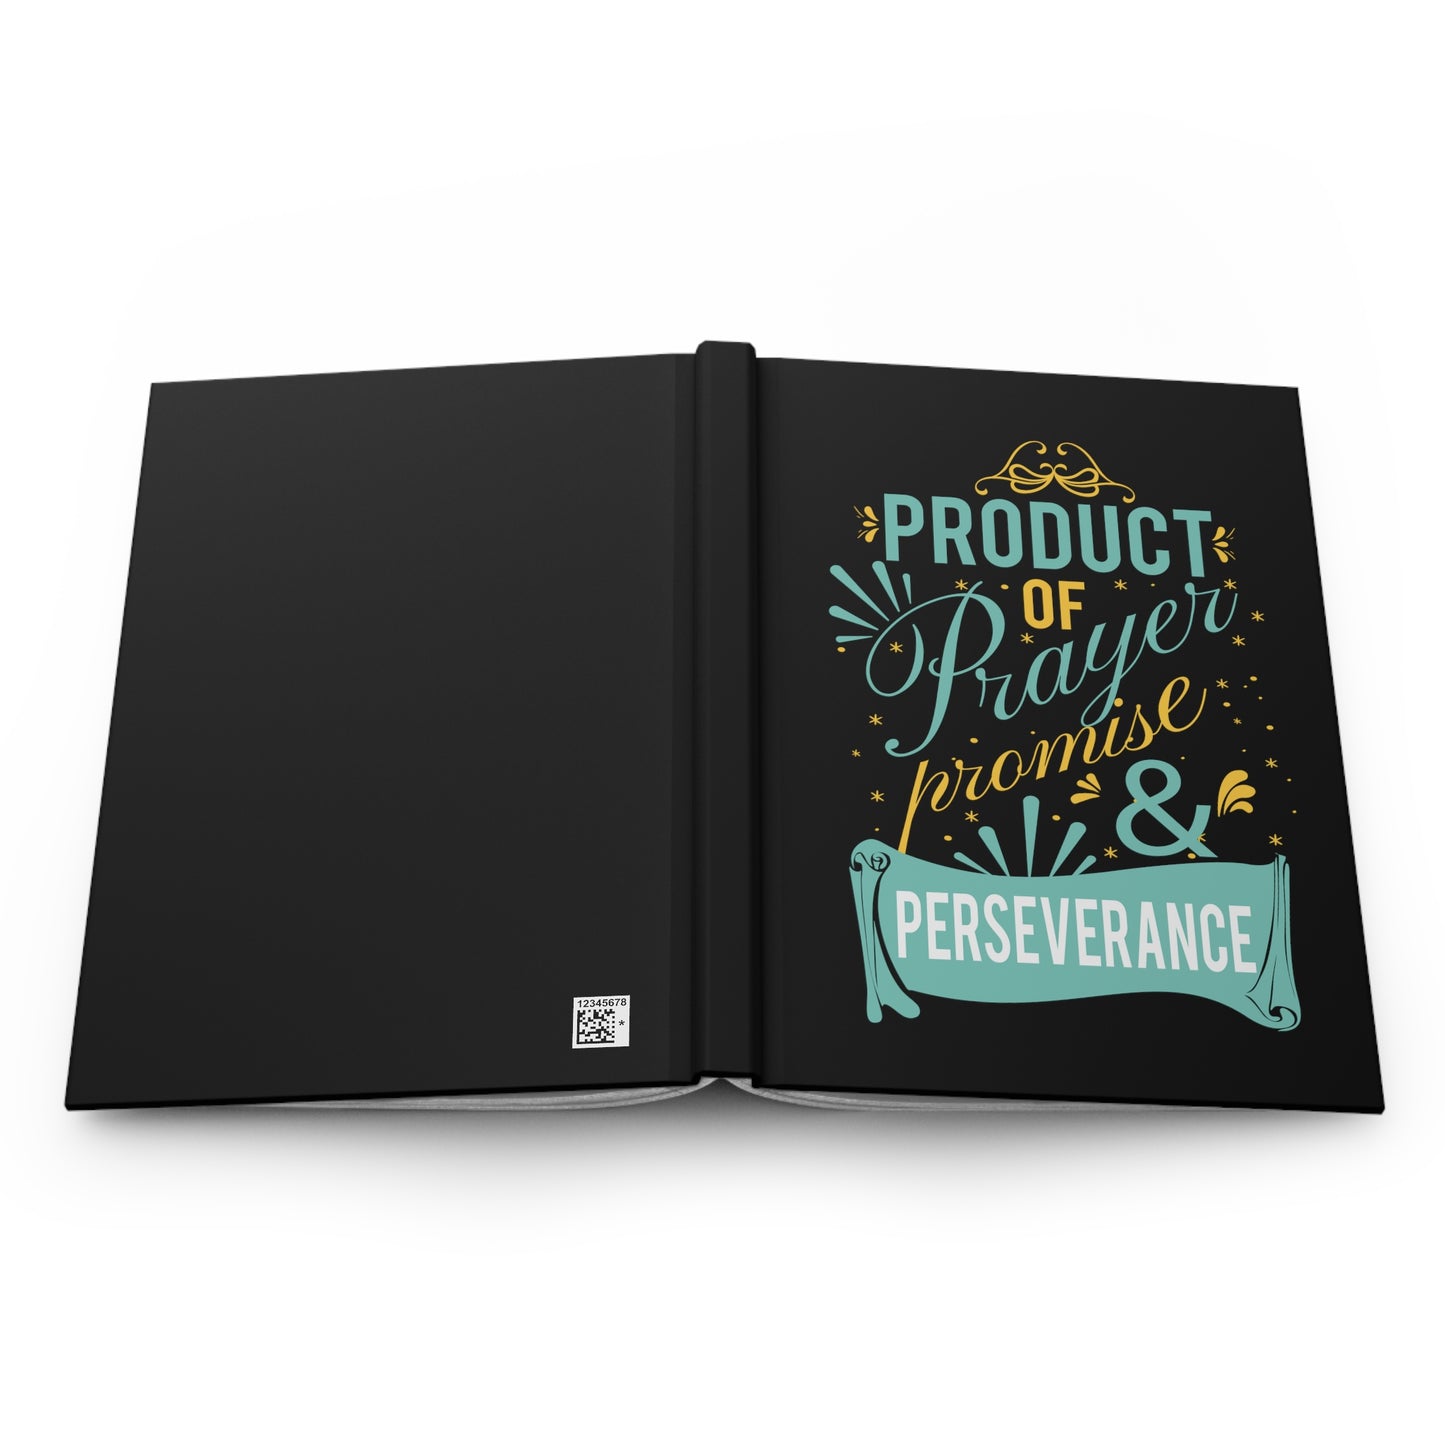 Product of Prayer, promise, and perseverance Hardcover Journal Matte